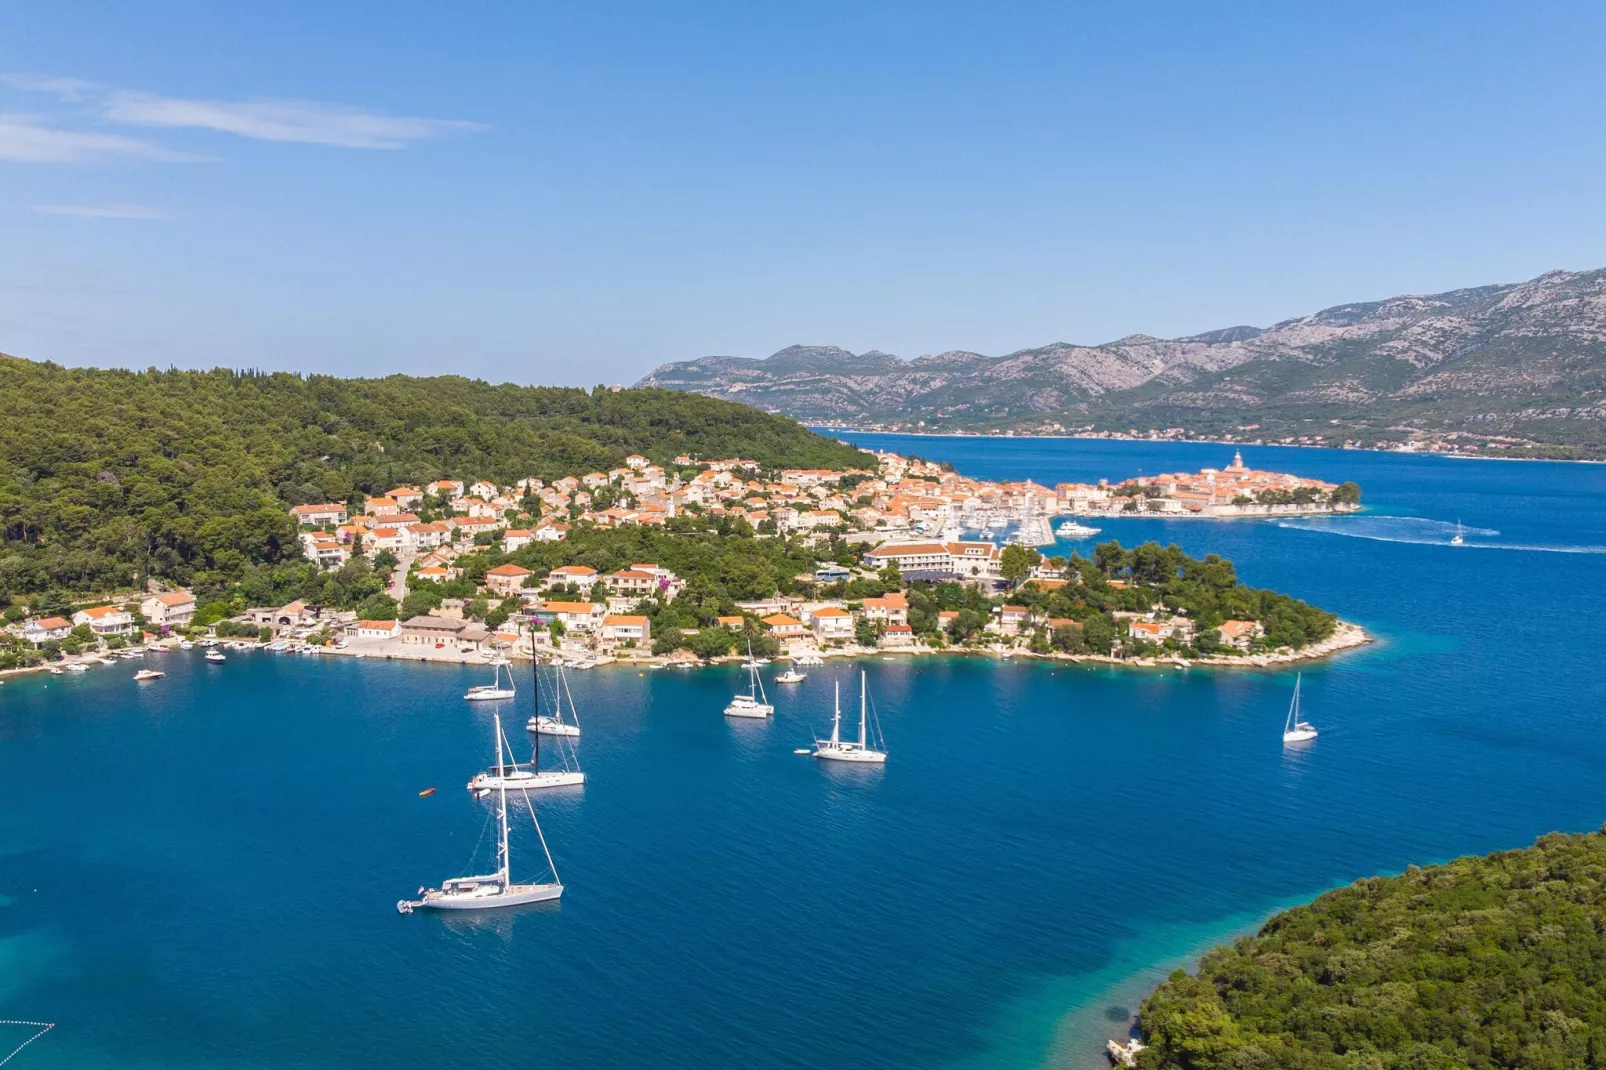 Apartments Aminess Port 9 Residence Korcula-Tip B Olea 4 renovated-Gebieden zomer 1km